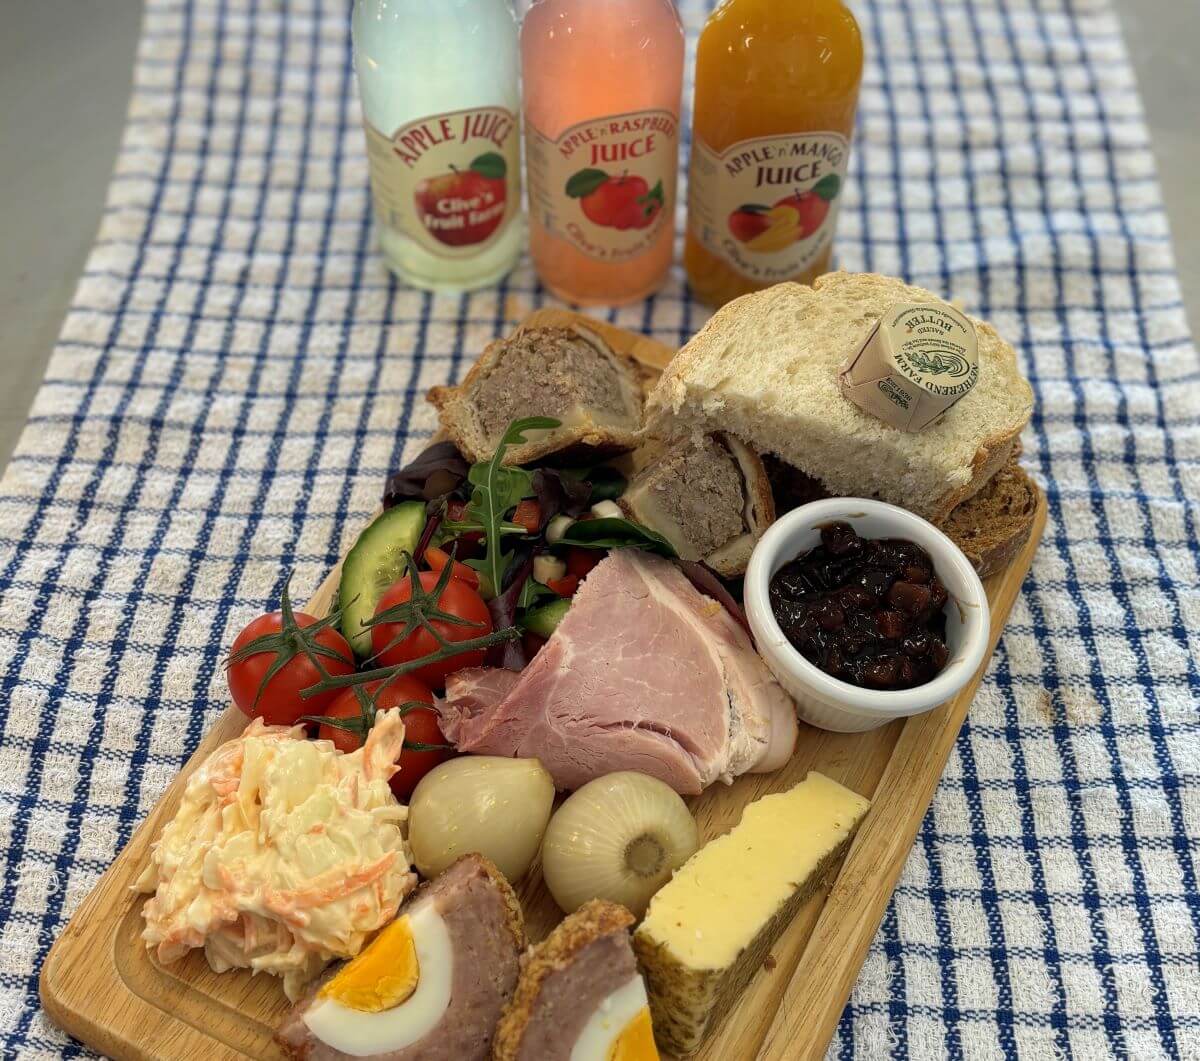 A traditional ploughman's lunch